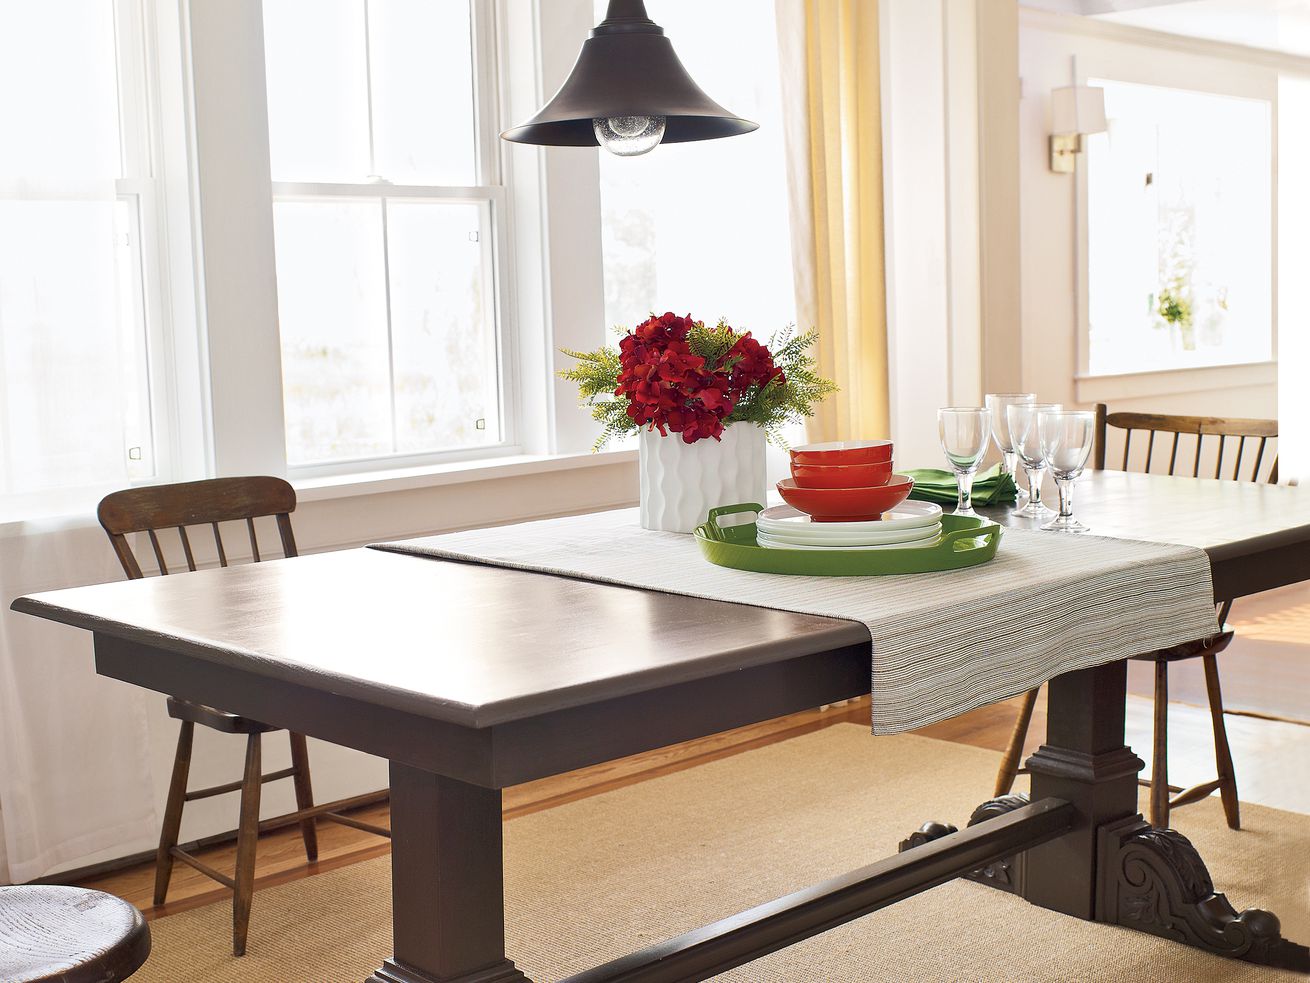 How to Make a Trestle Table